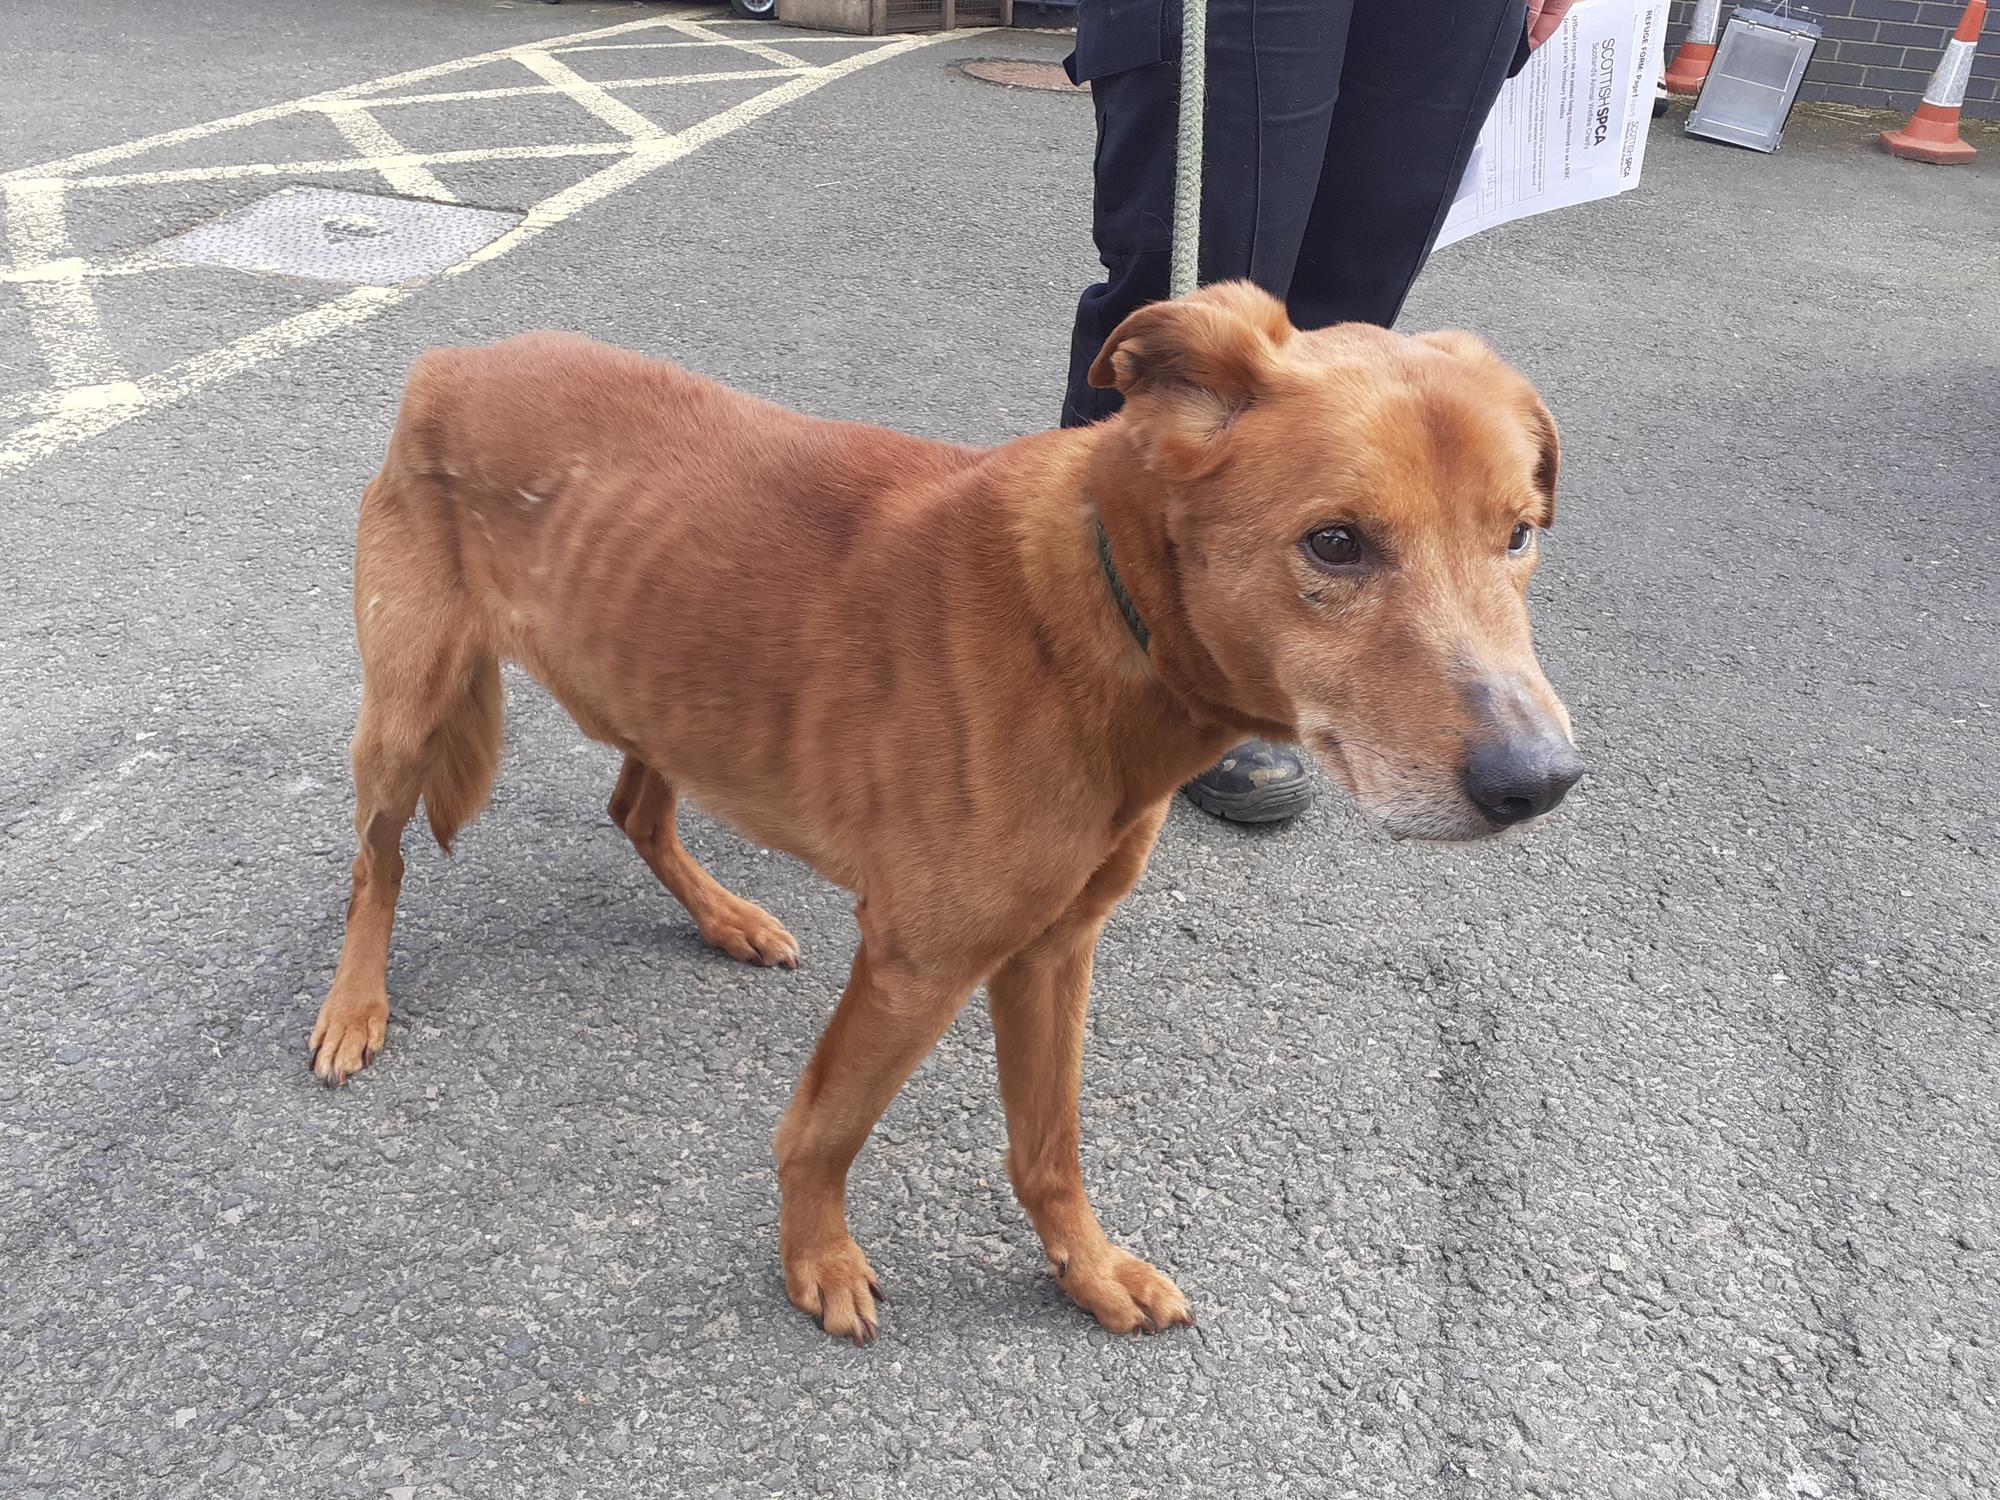 Elderly and underweight dog which may have suffered a